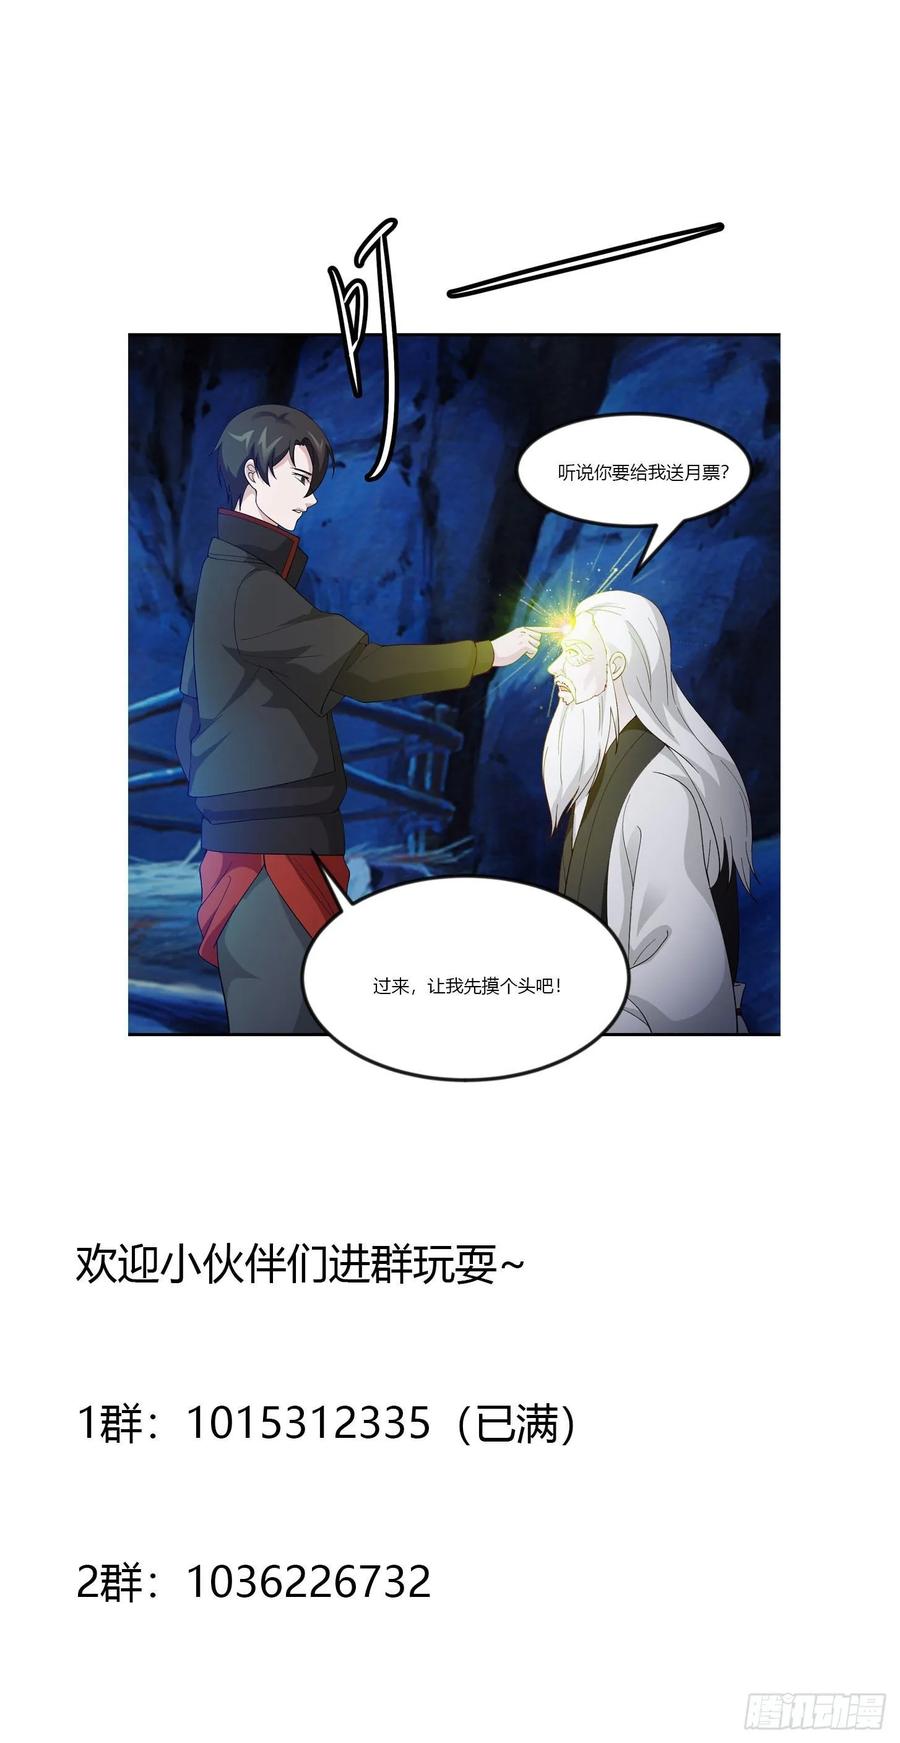 Chaos Emperor Chapter 48